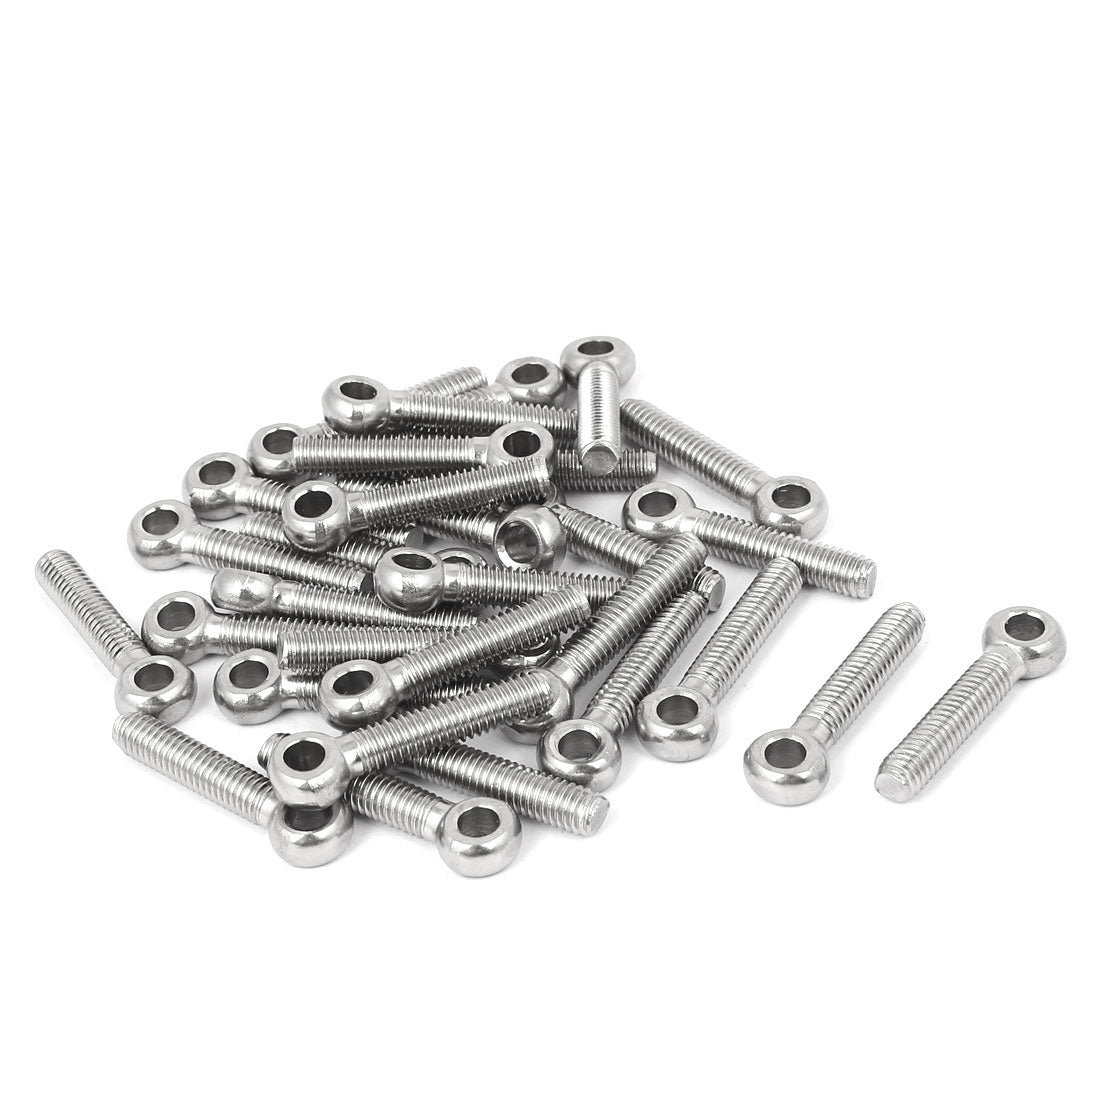 uxcell Uxcell M6 x 30mm 304 Stainless Steel Machine Shoulder Lift Eye Bolt Rigging 30pcs